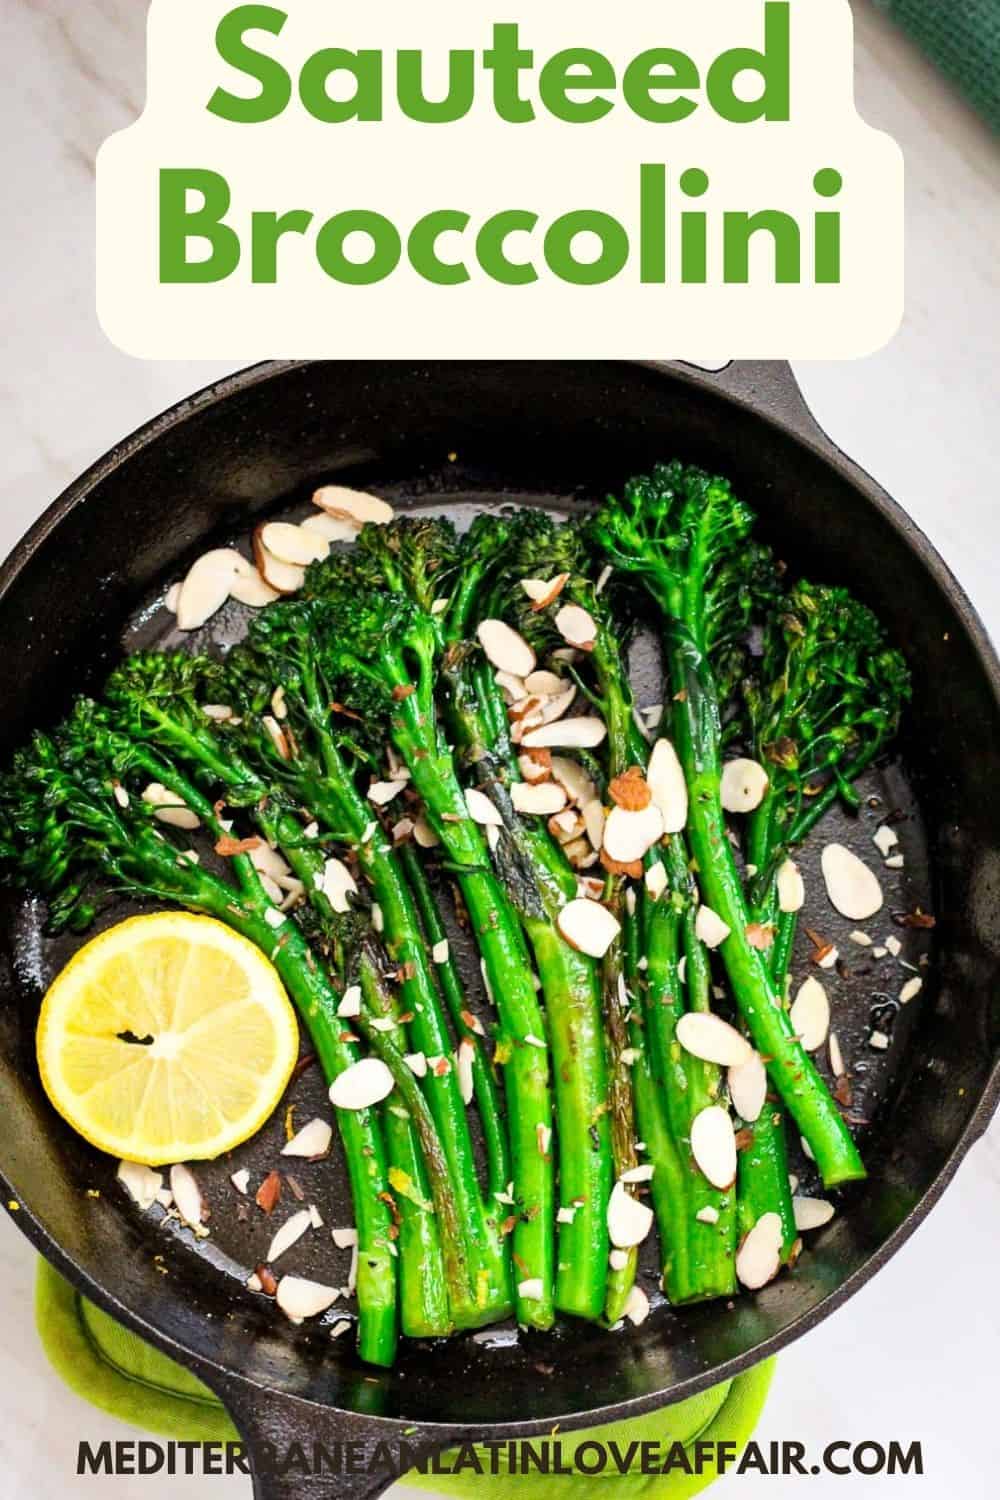 An image prepared for Pinterest. It shows a picture of broccolini in a cast iron skillet with lemon and almonds. The picture has a title bar on top and a website link at the bottom.